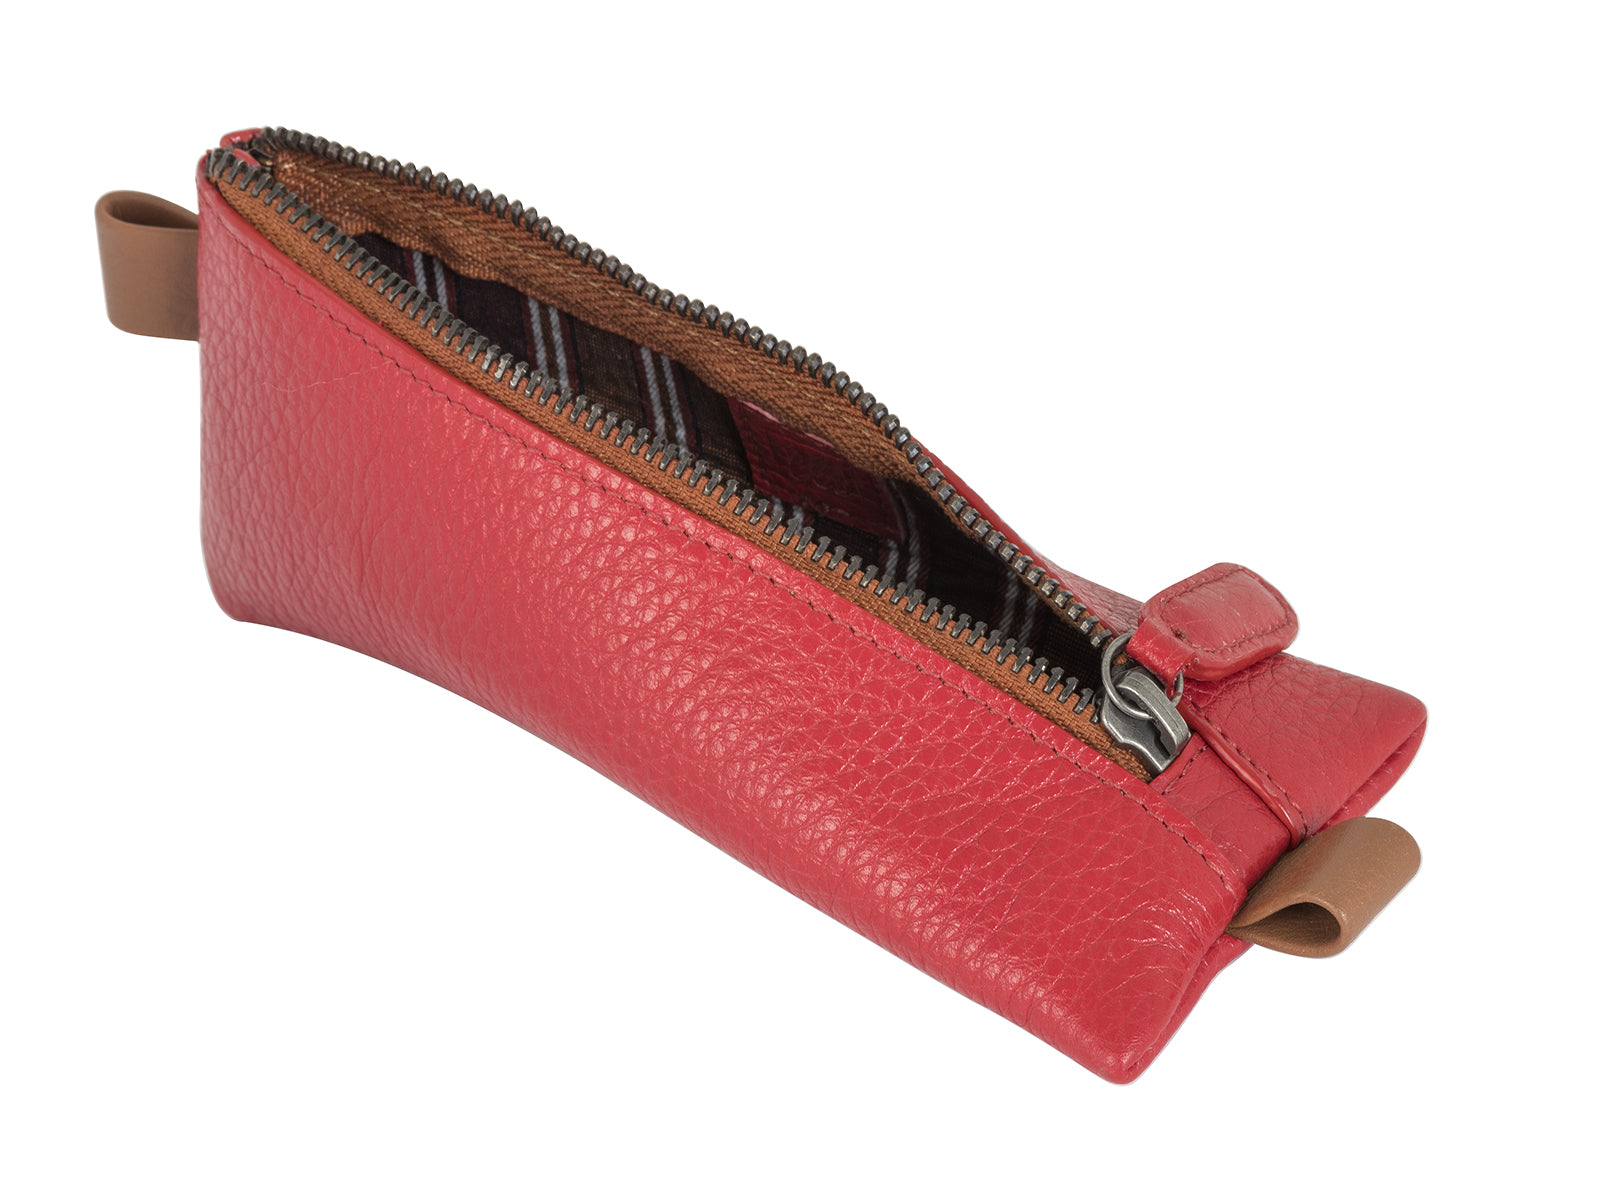 Chic pencil case - Scarlet Red/ Brown